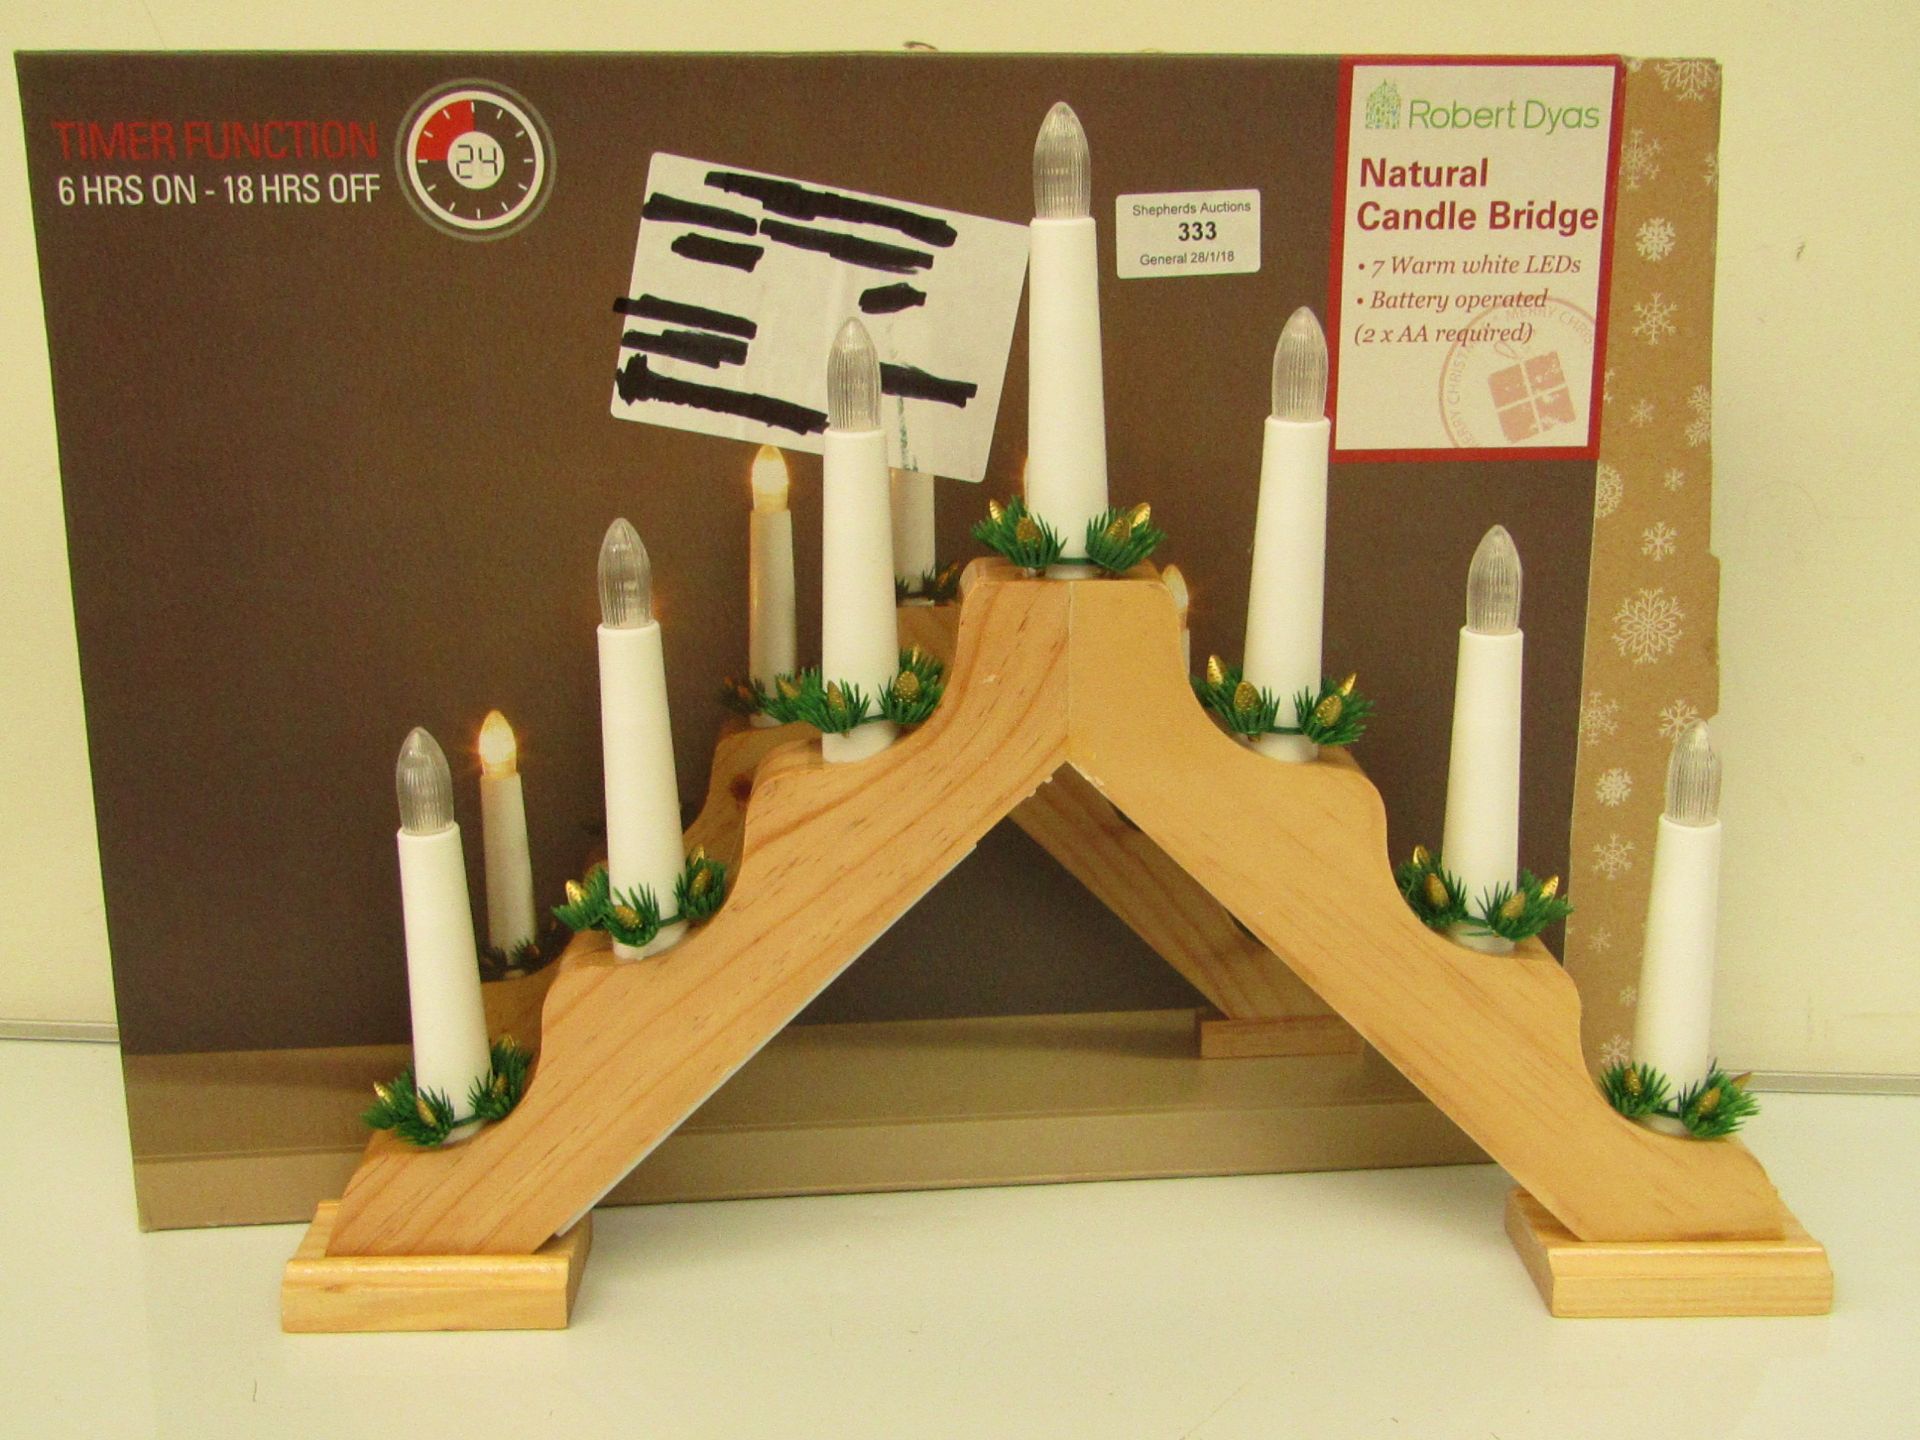 Natural Candle Bridge, boxed and unchecked